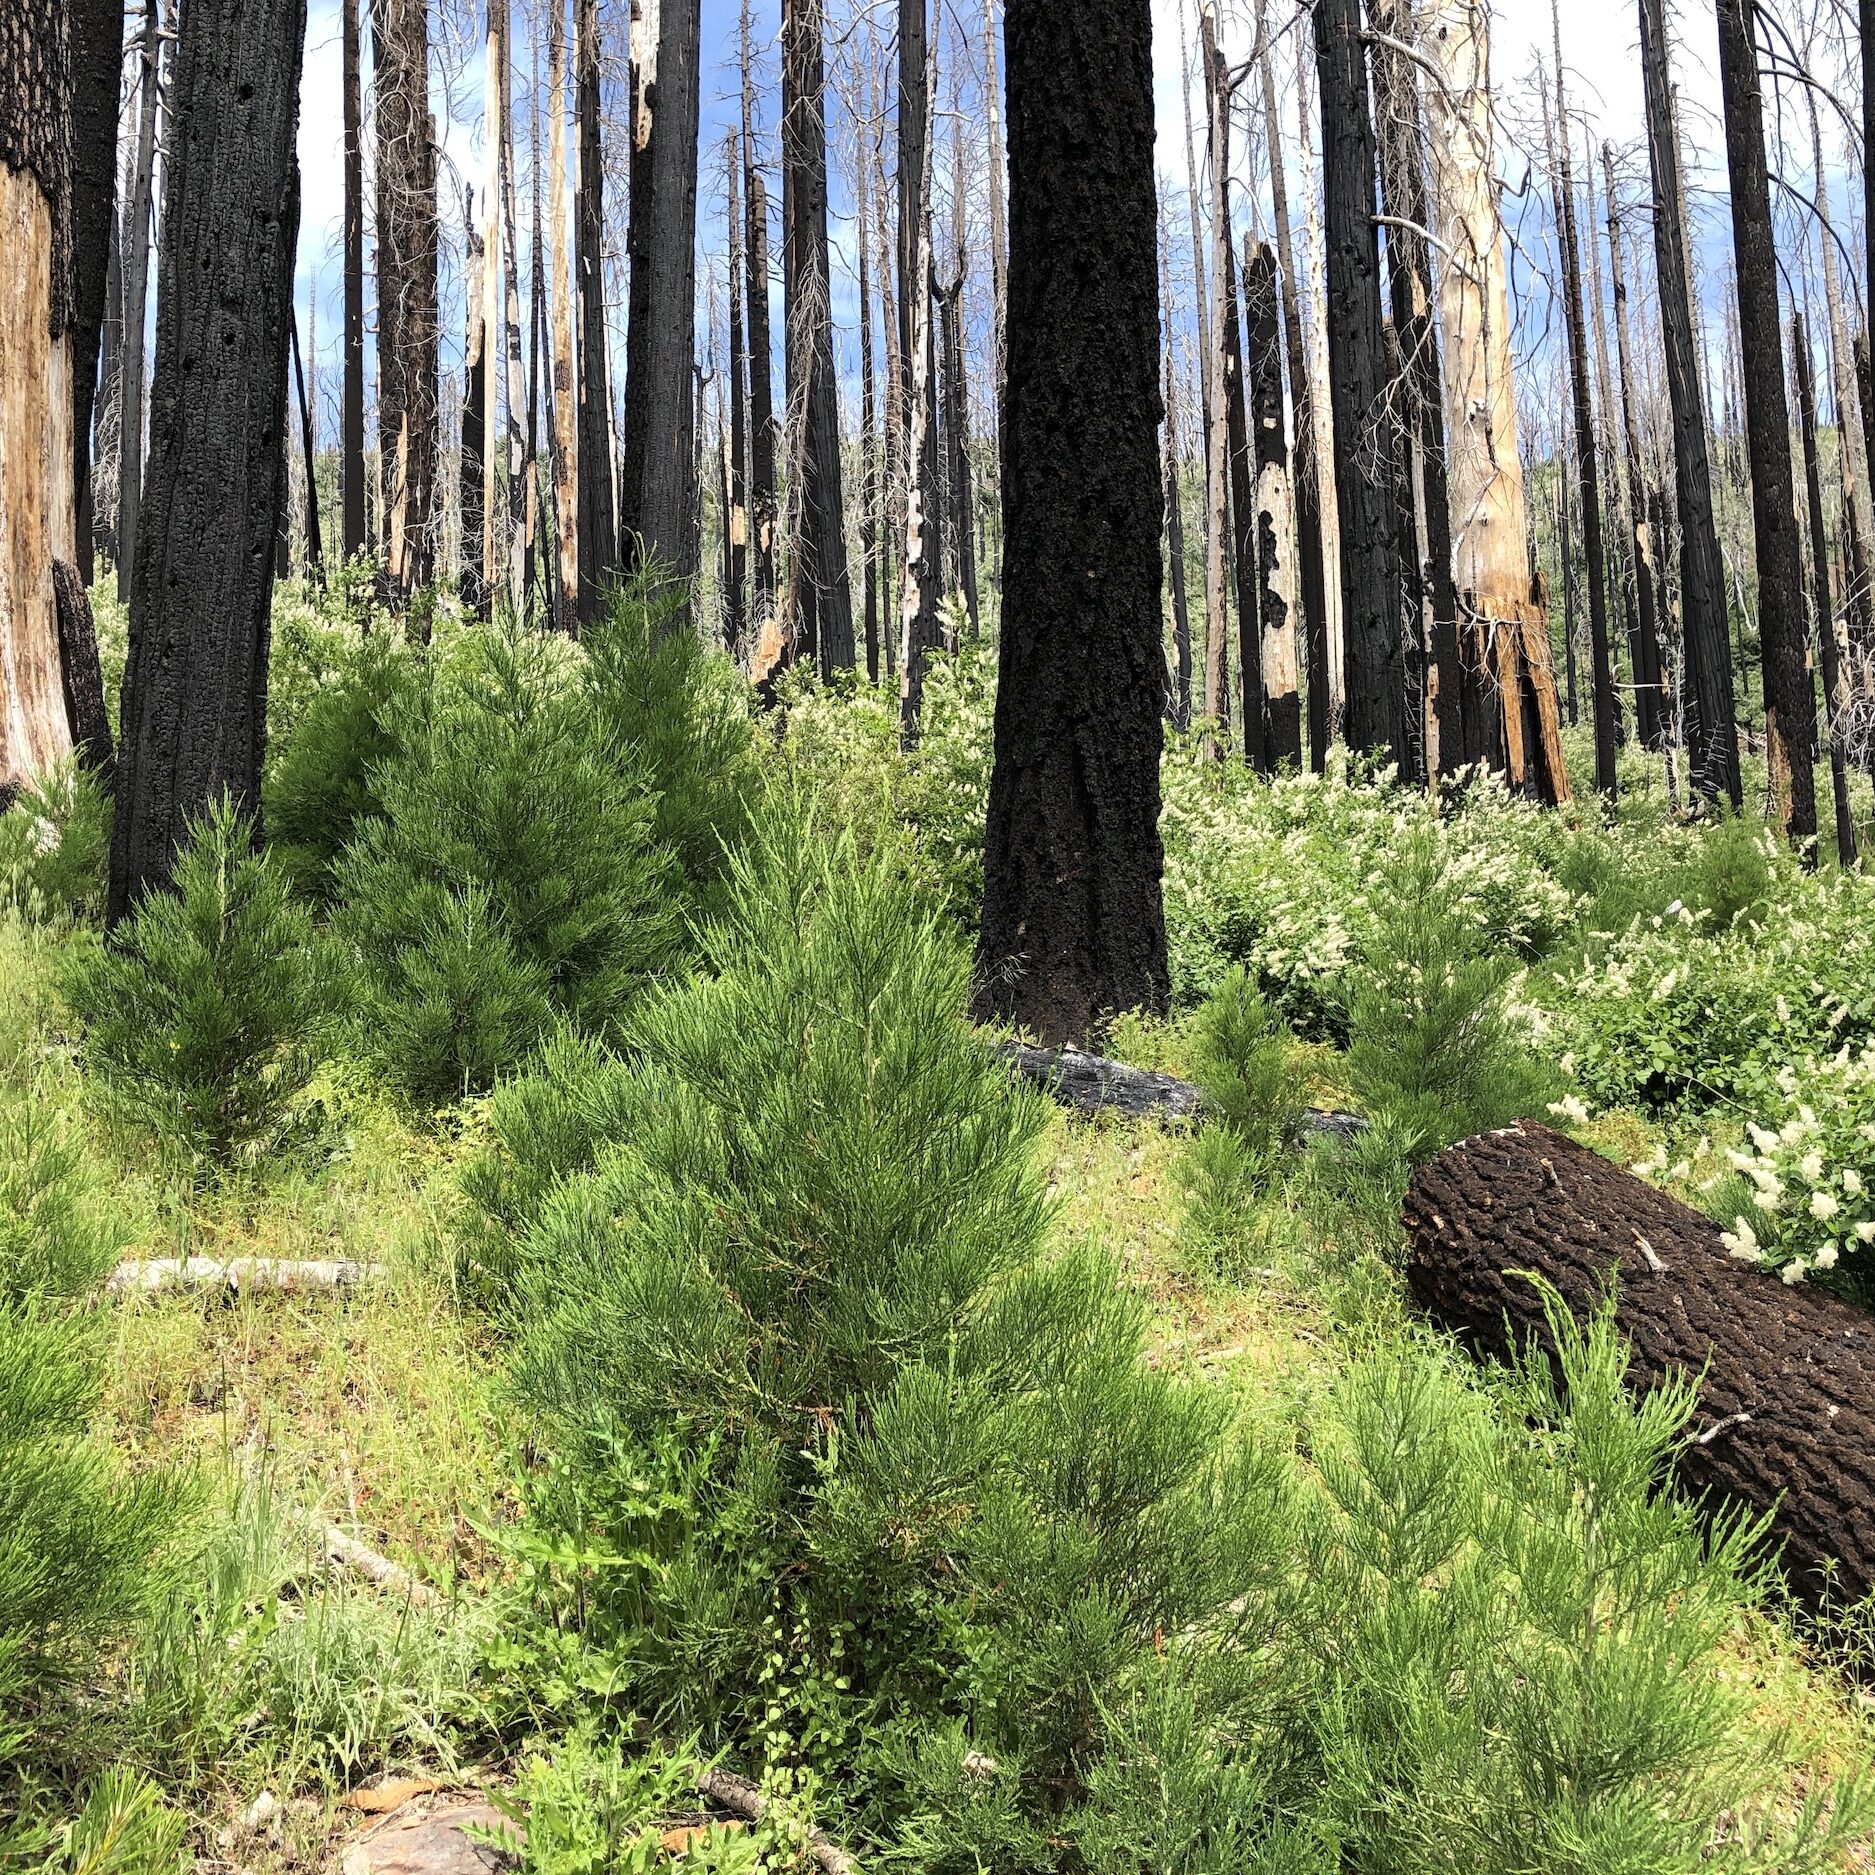 Abundant natural post-fire giant sequoia seedling regeneration in a high-intensity fire patch in our Nelder Grove study site.